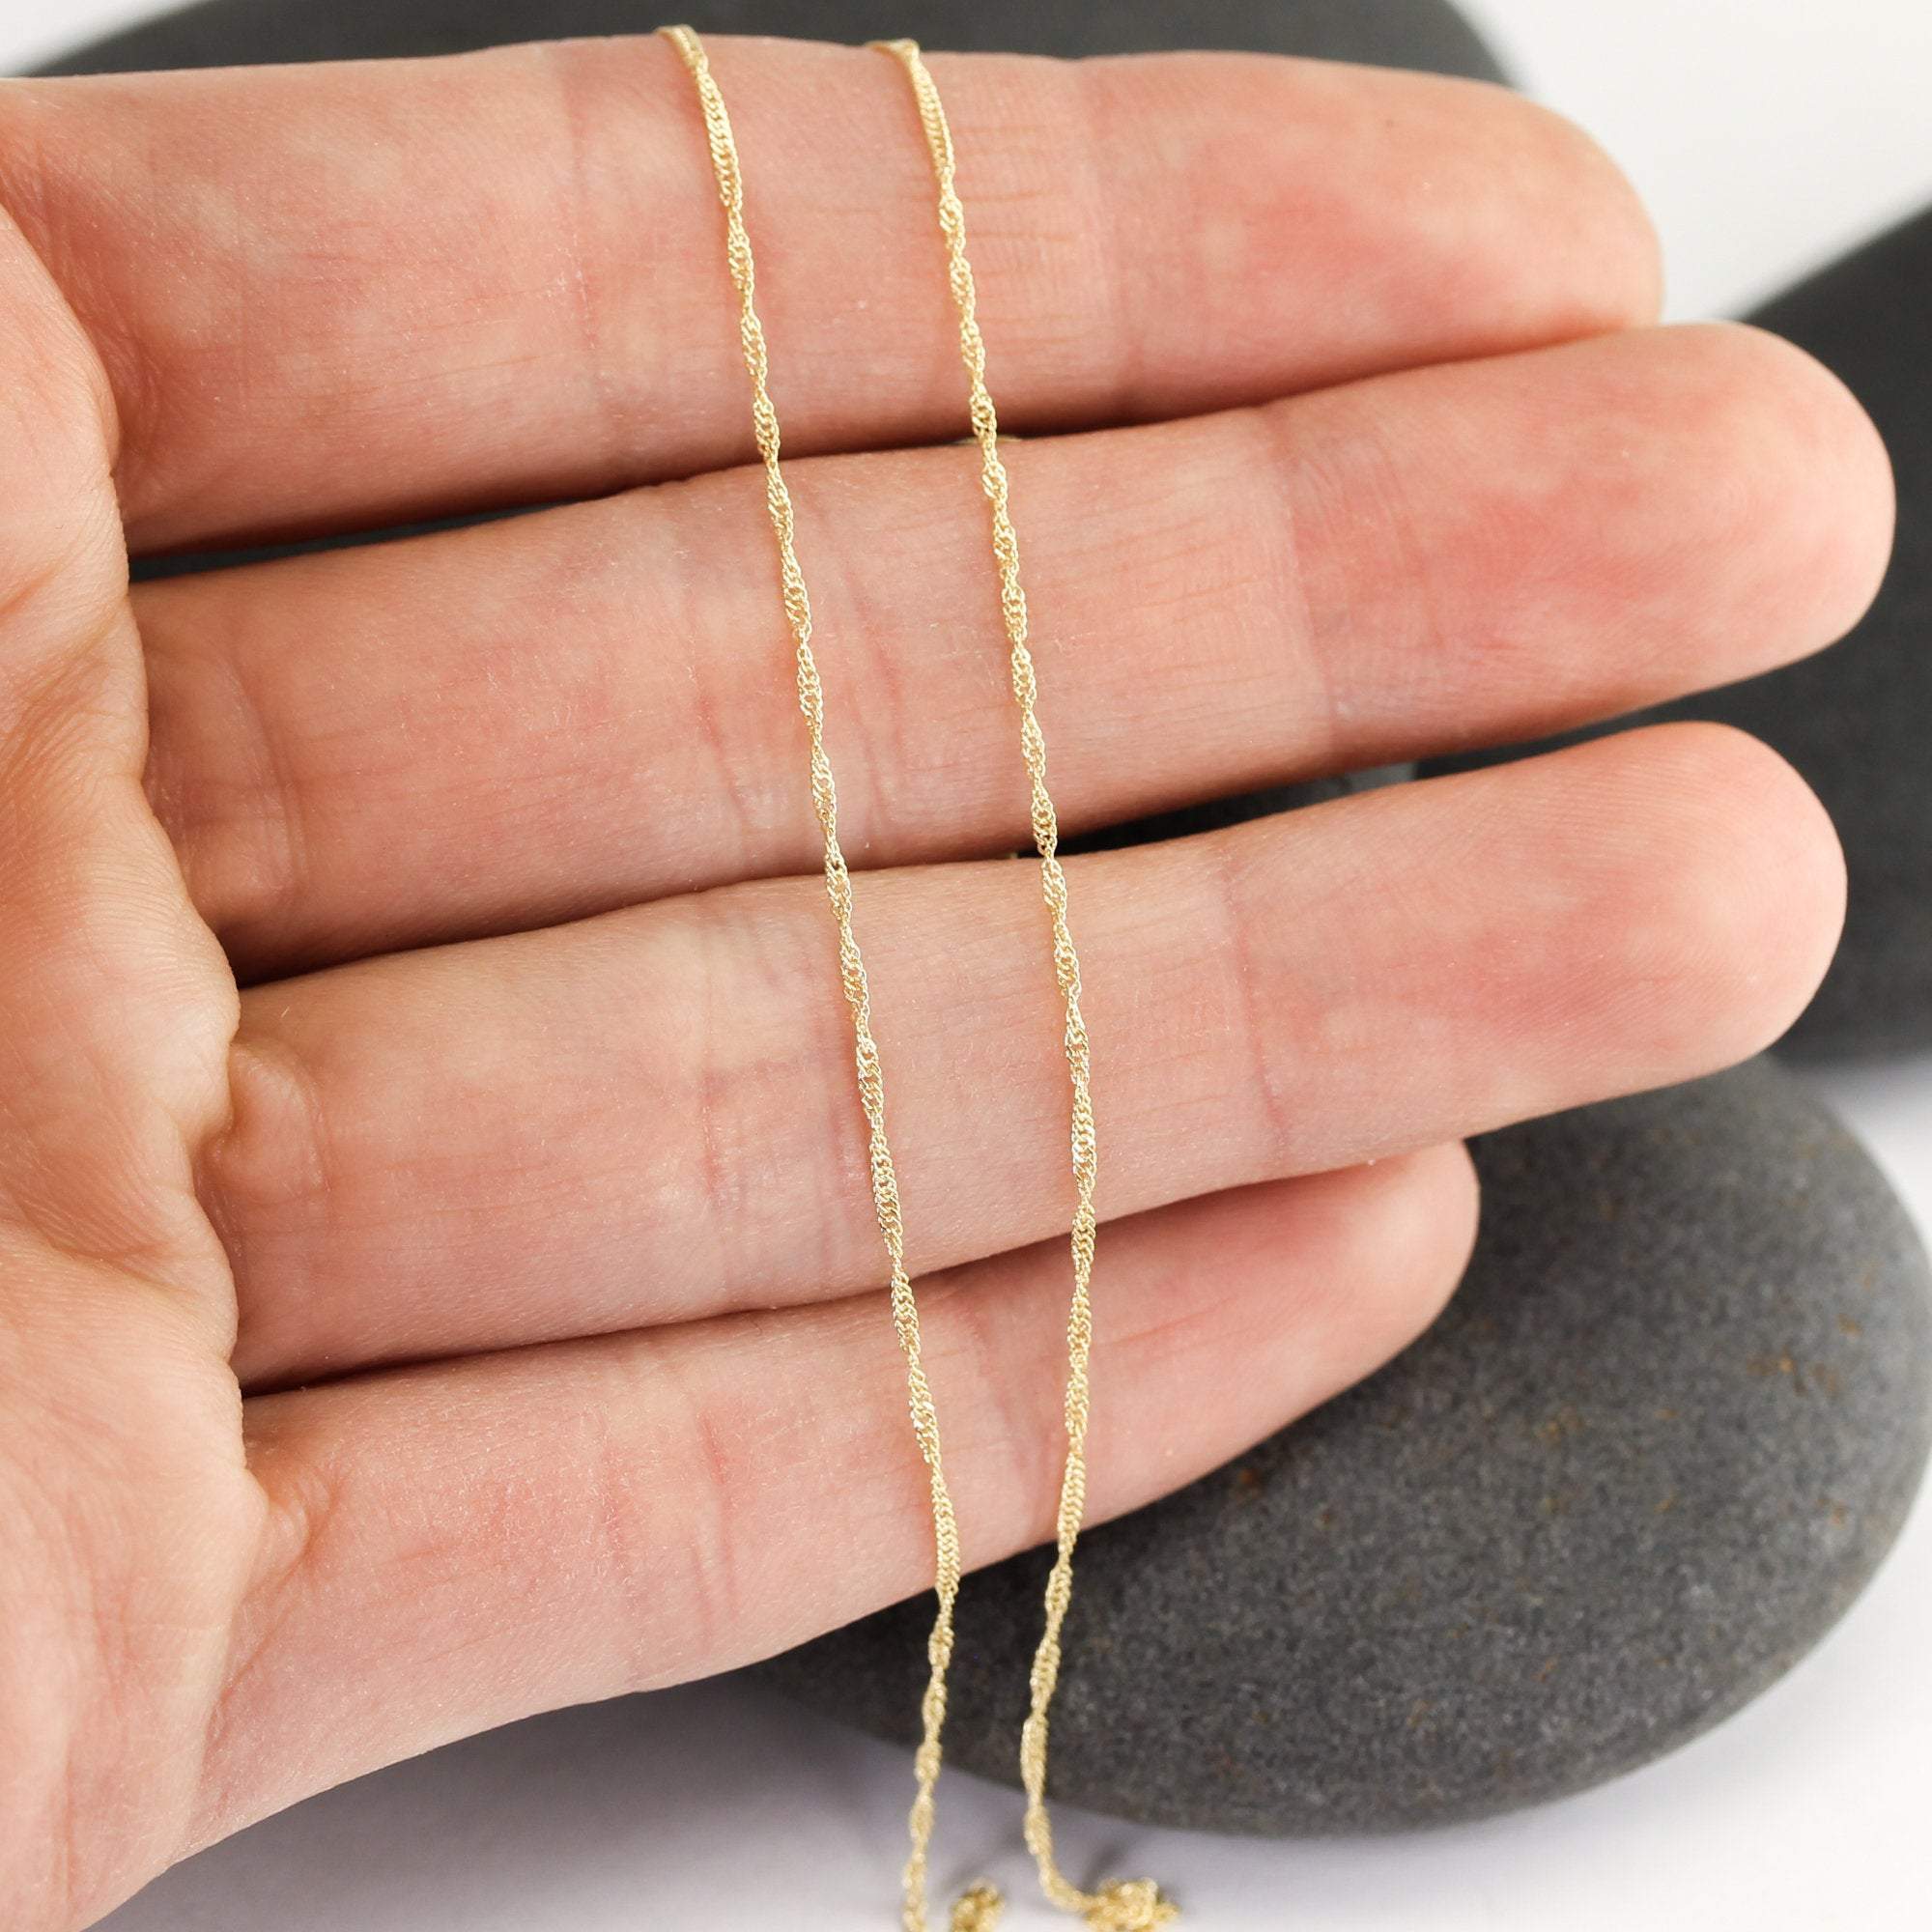 Buy Dainty Twist Chain Woman Necklace/ 14K Solid Yellow Gold Chain Necklace/  Essential Layering Chain/ Gold Twist Chains/ Christmas Gifts Online in  India - Etsy